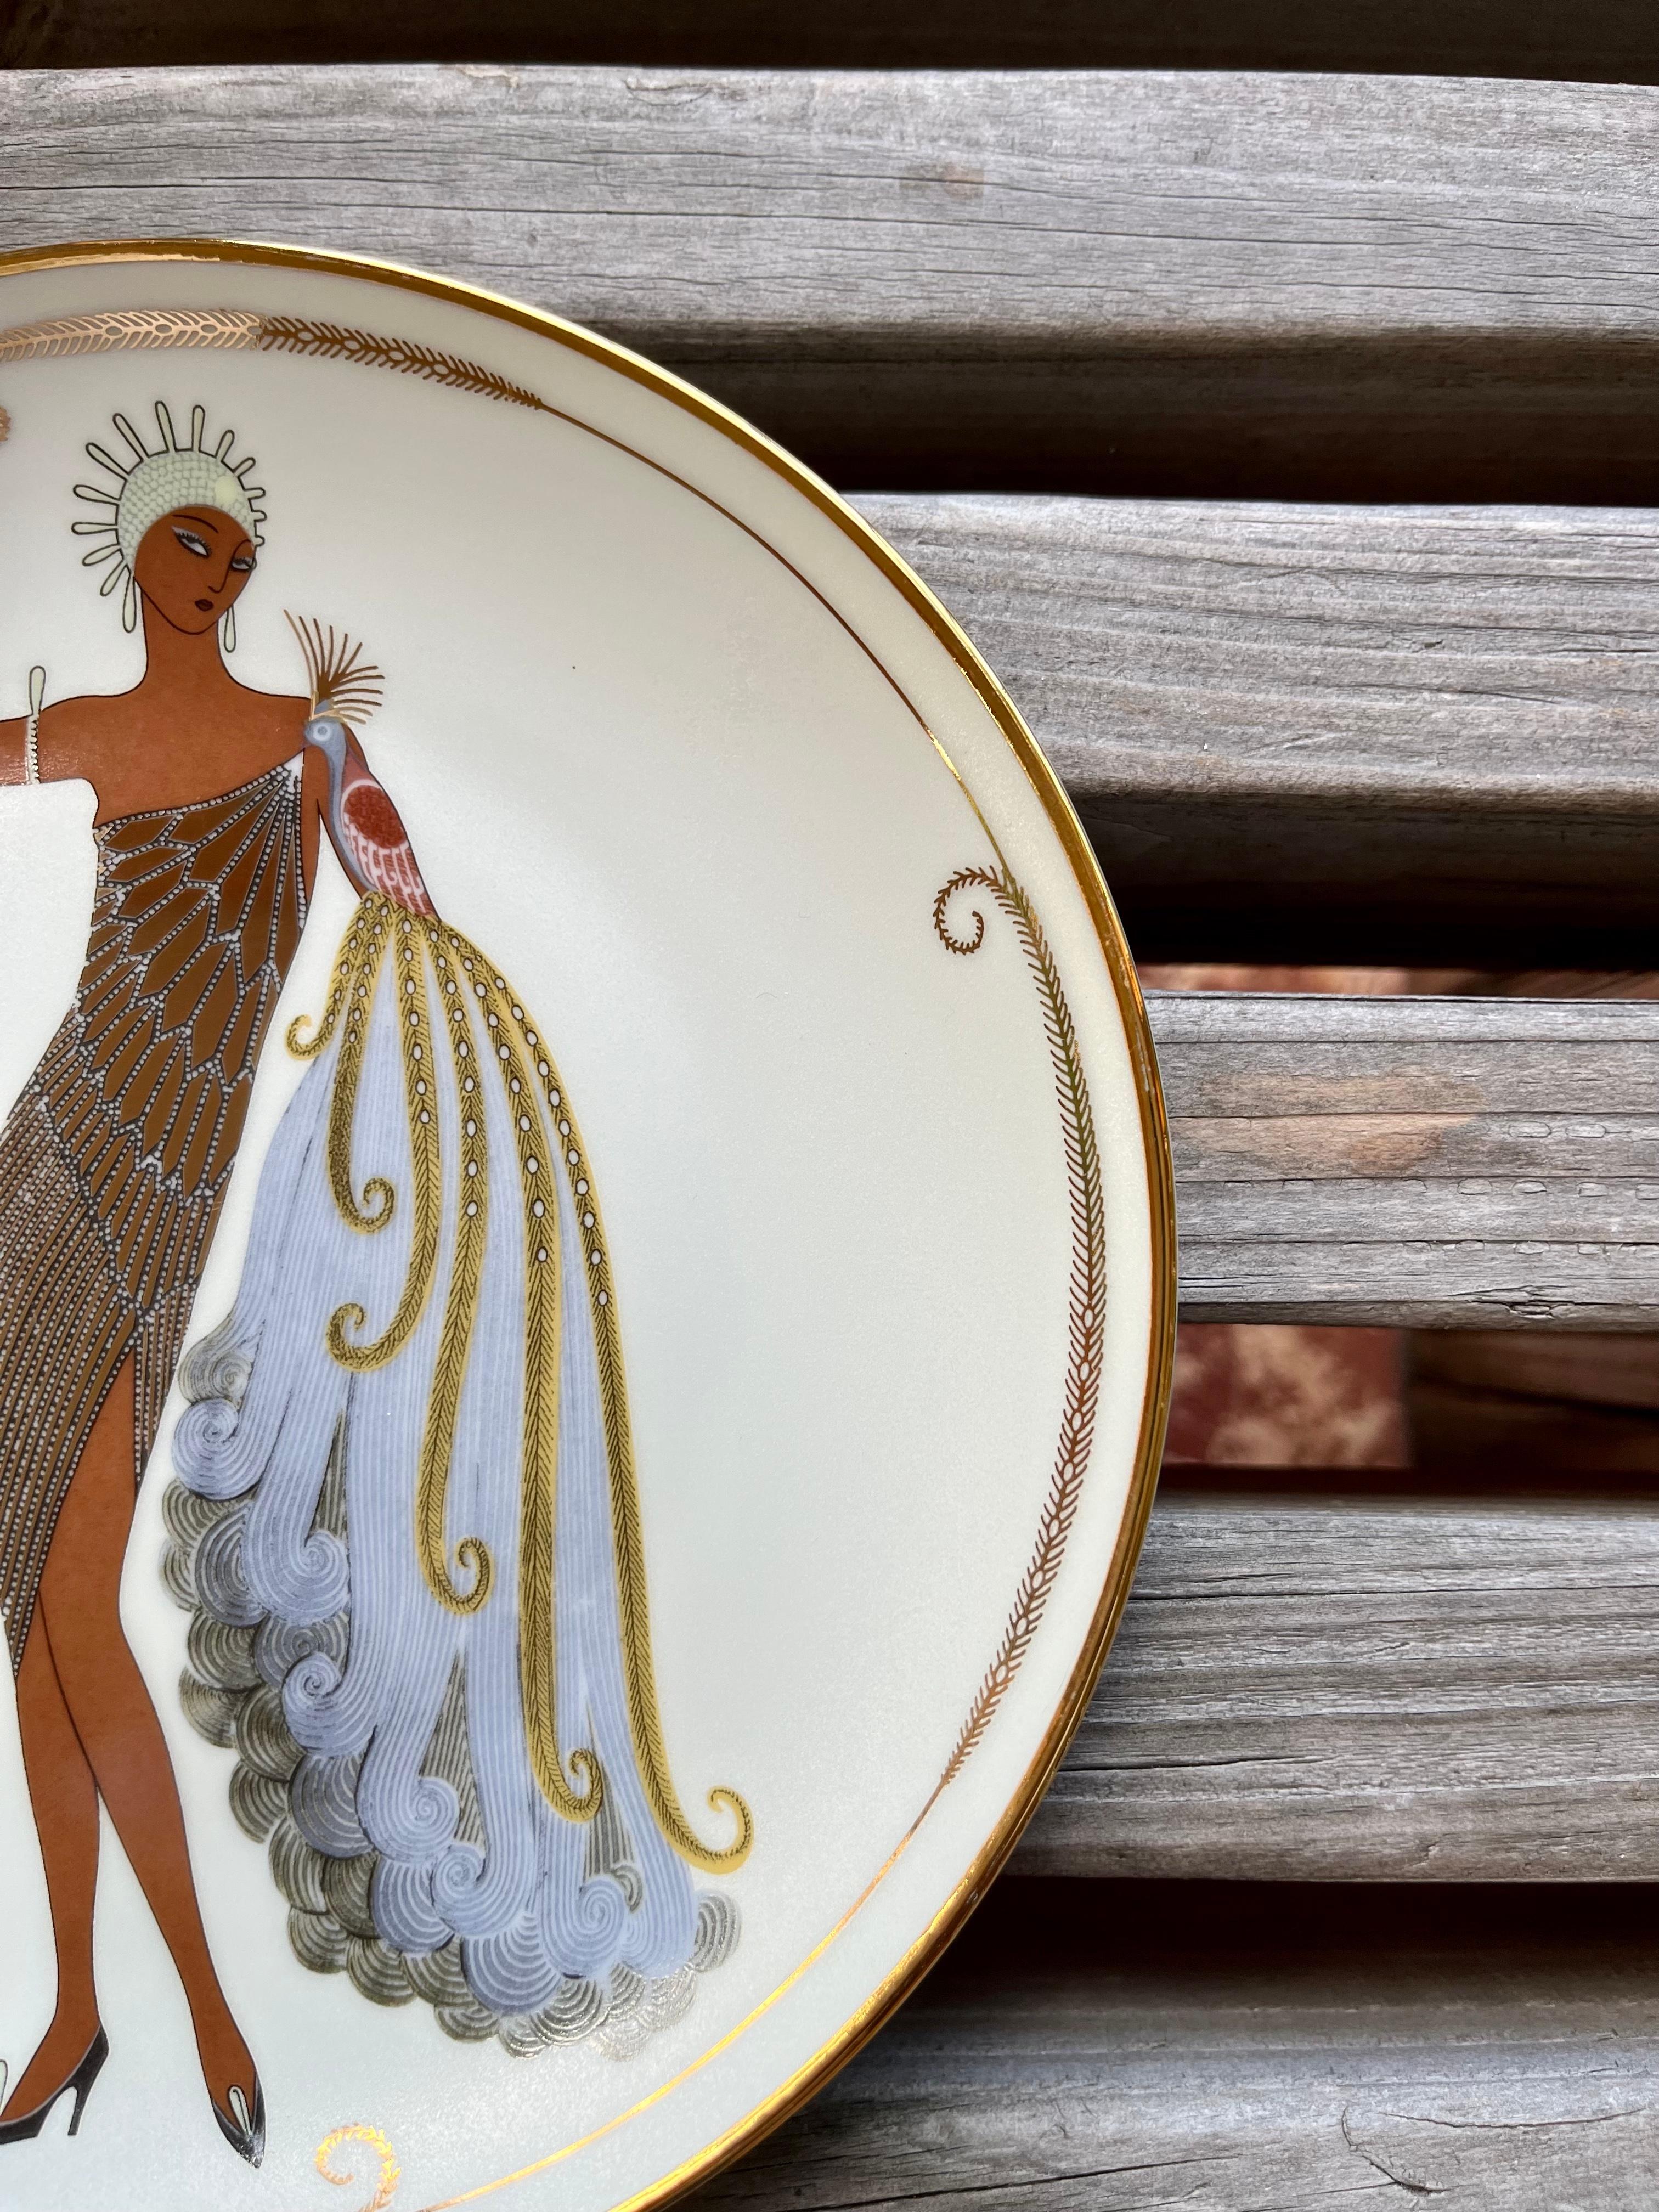 Late 20th Century Franklin Mint The House of Erte Porcelain Plate 